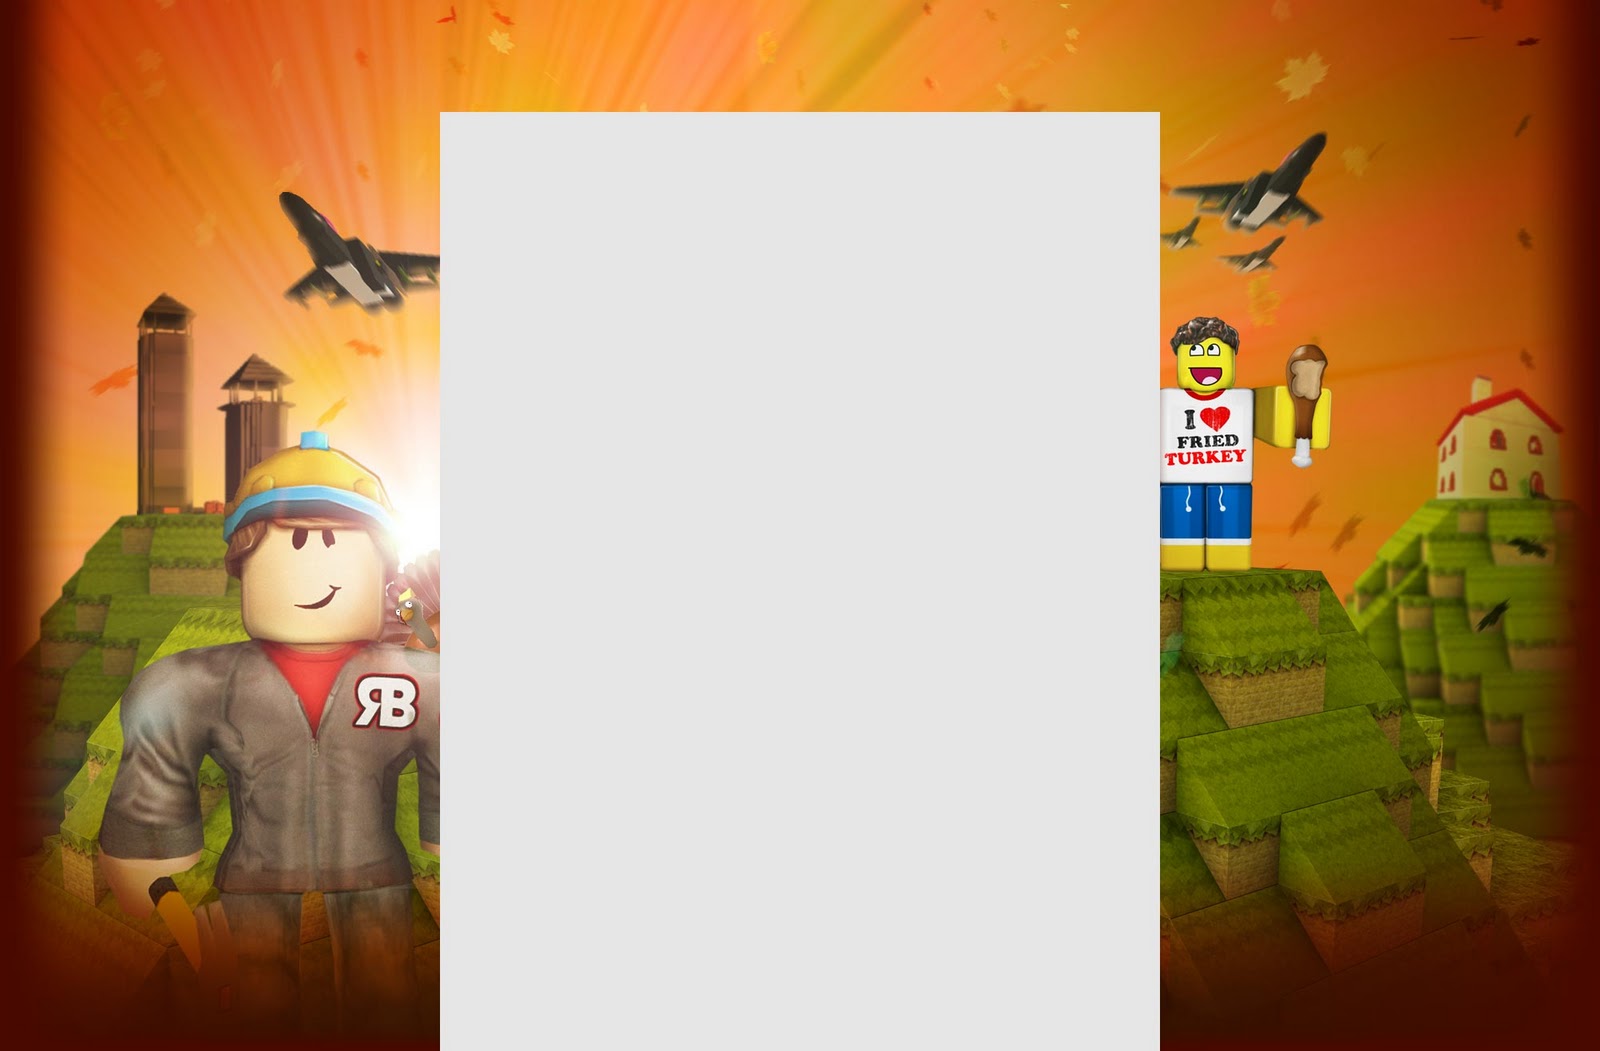 Roblox 2048X1152 Wallpapers